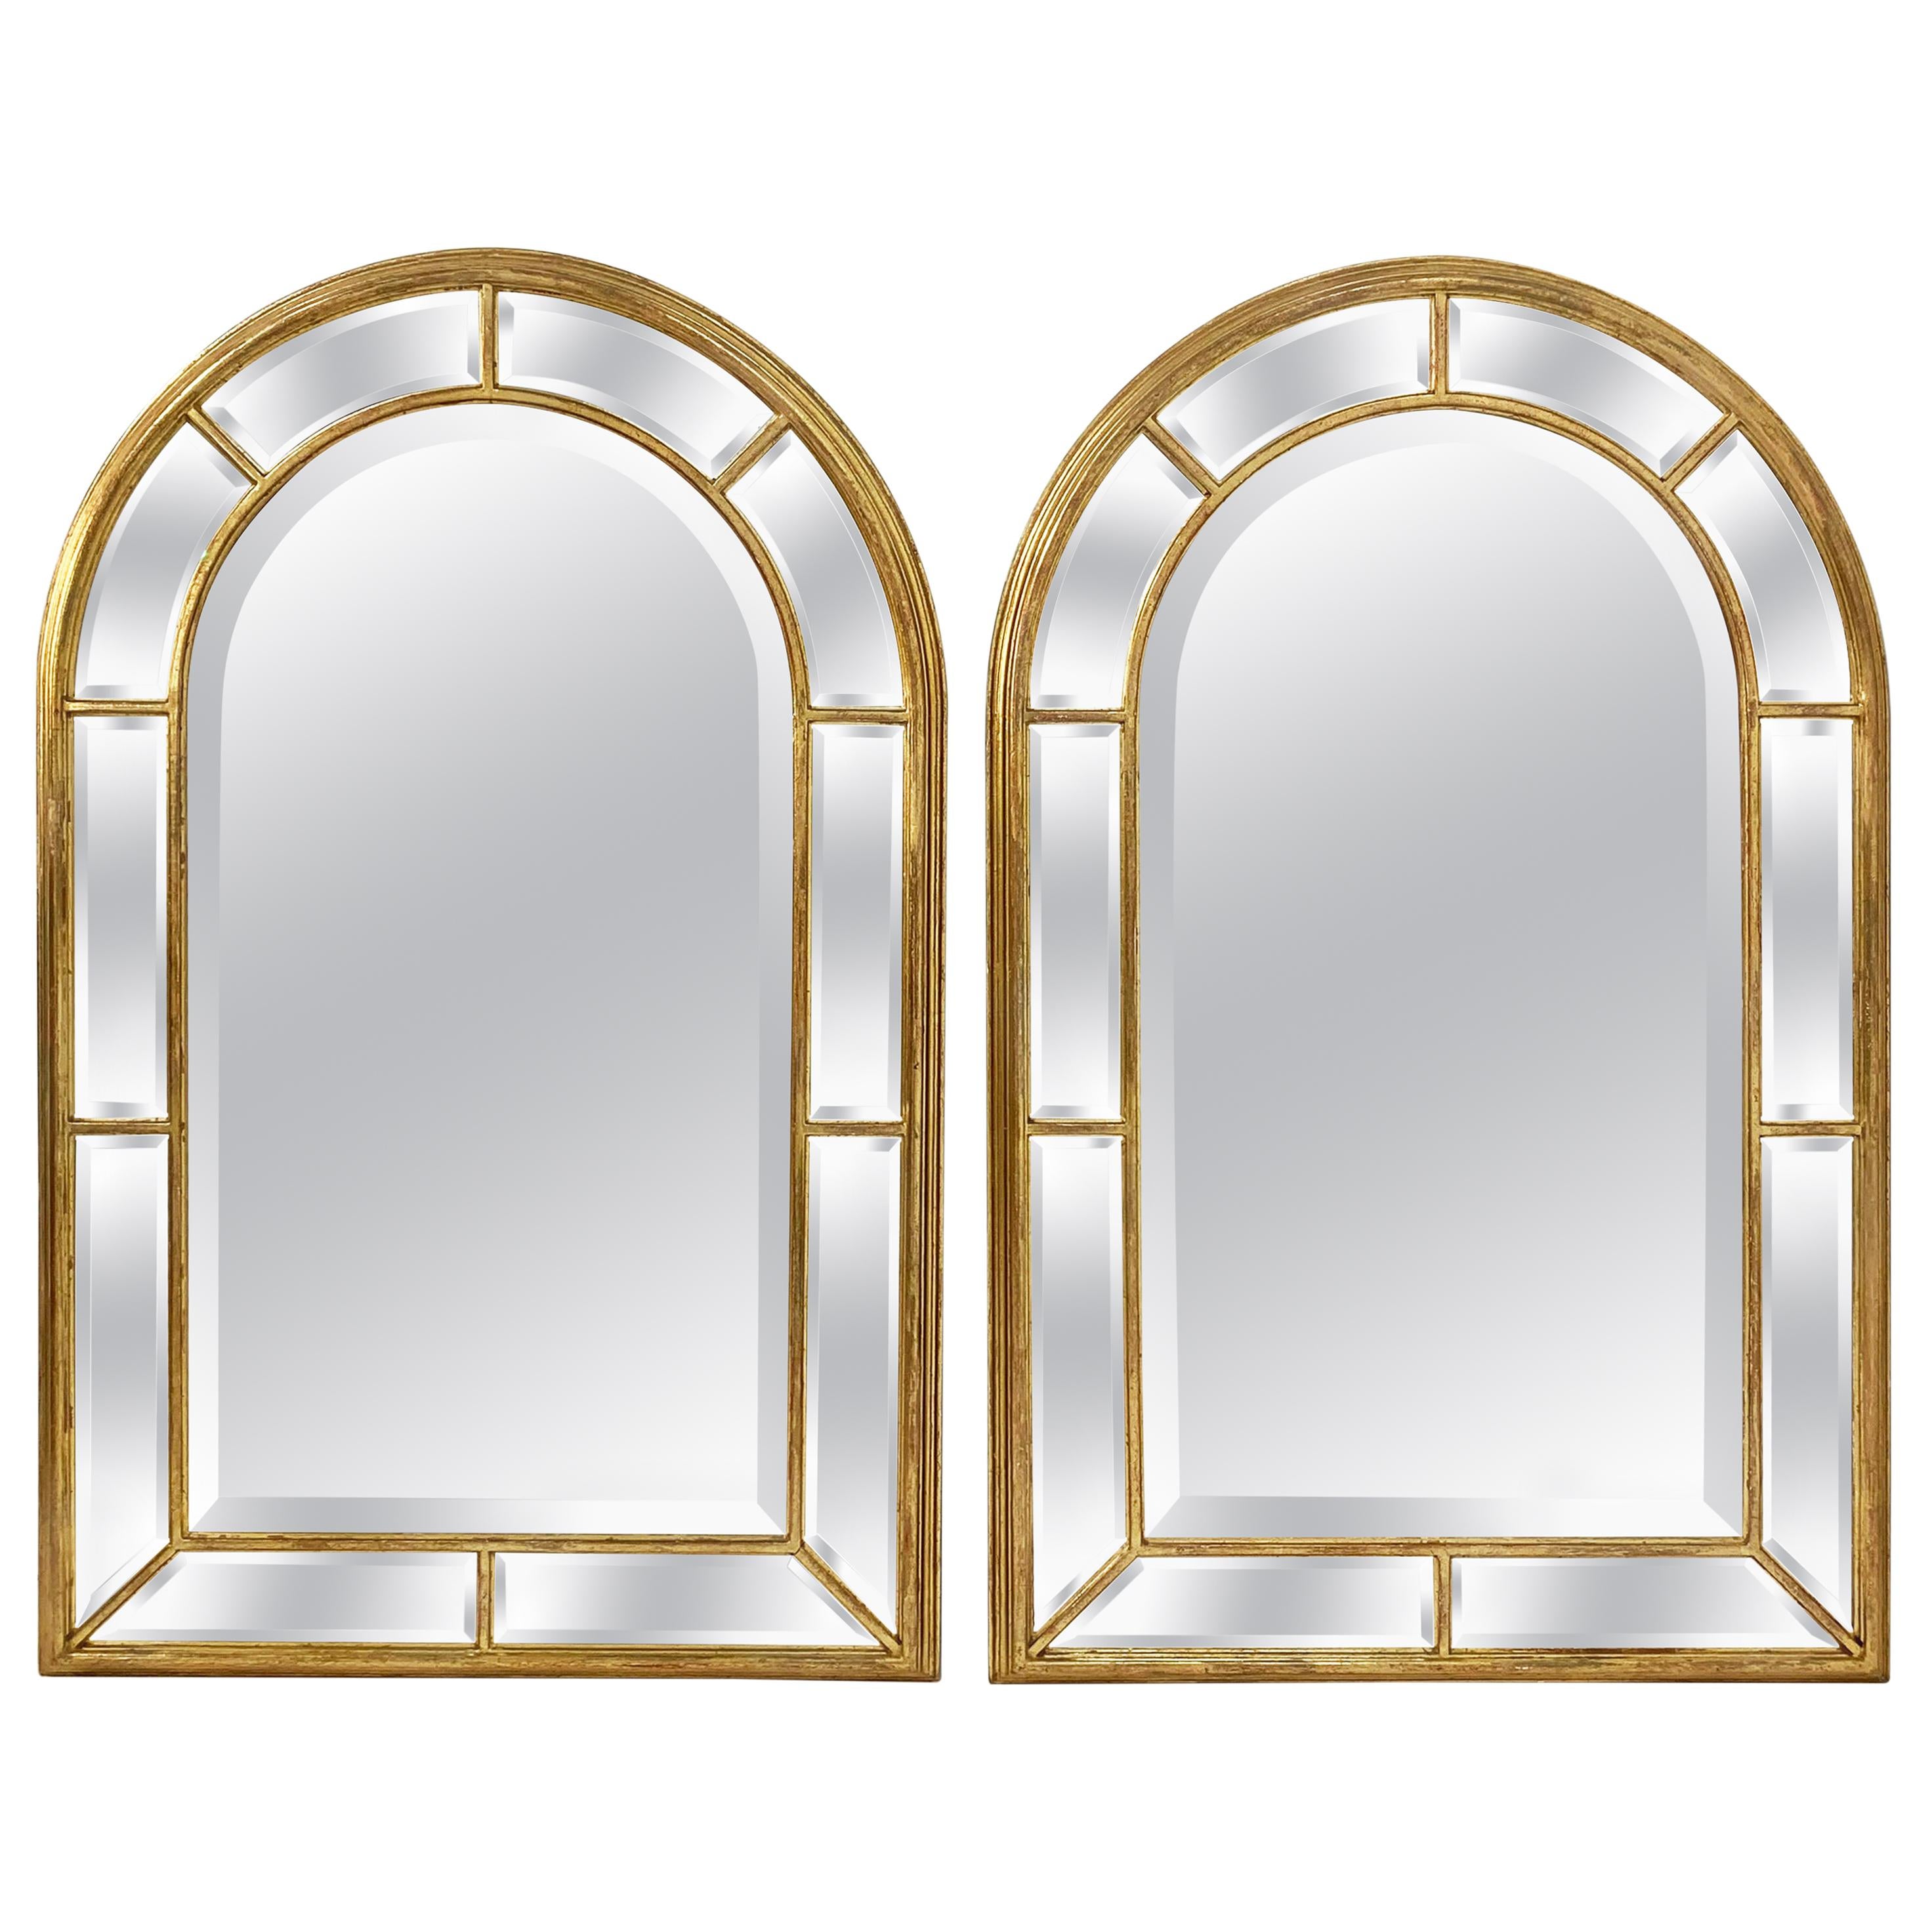 Pair of LaBarge Giltwood Mirrors, Made in Italy, circa 1970s